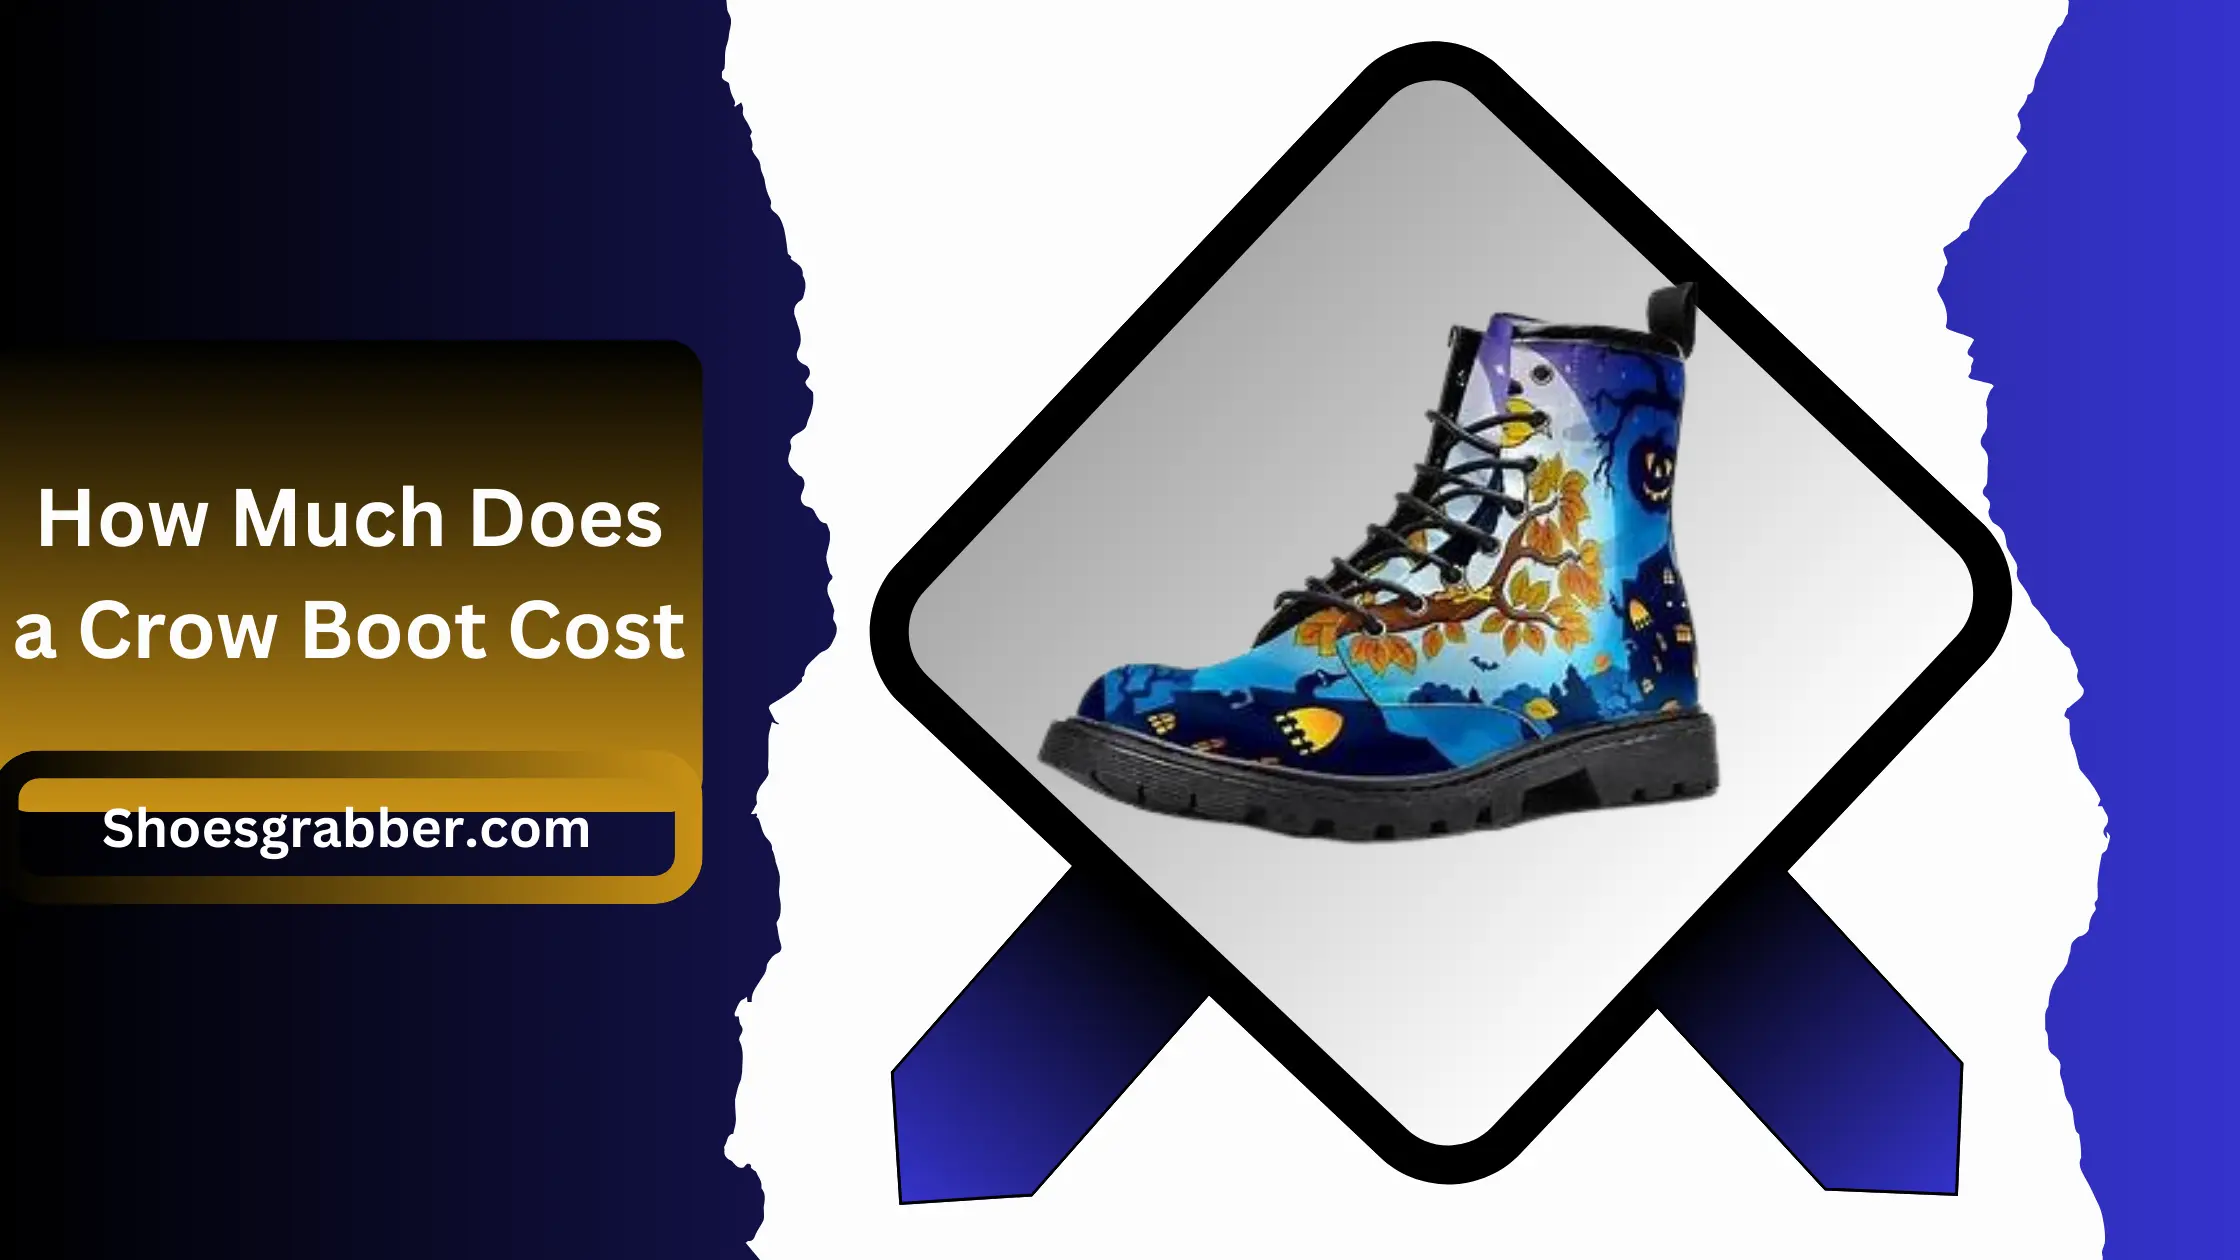 How Much Does a Crow Boot Cost - The Complete Guide